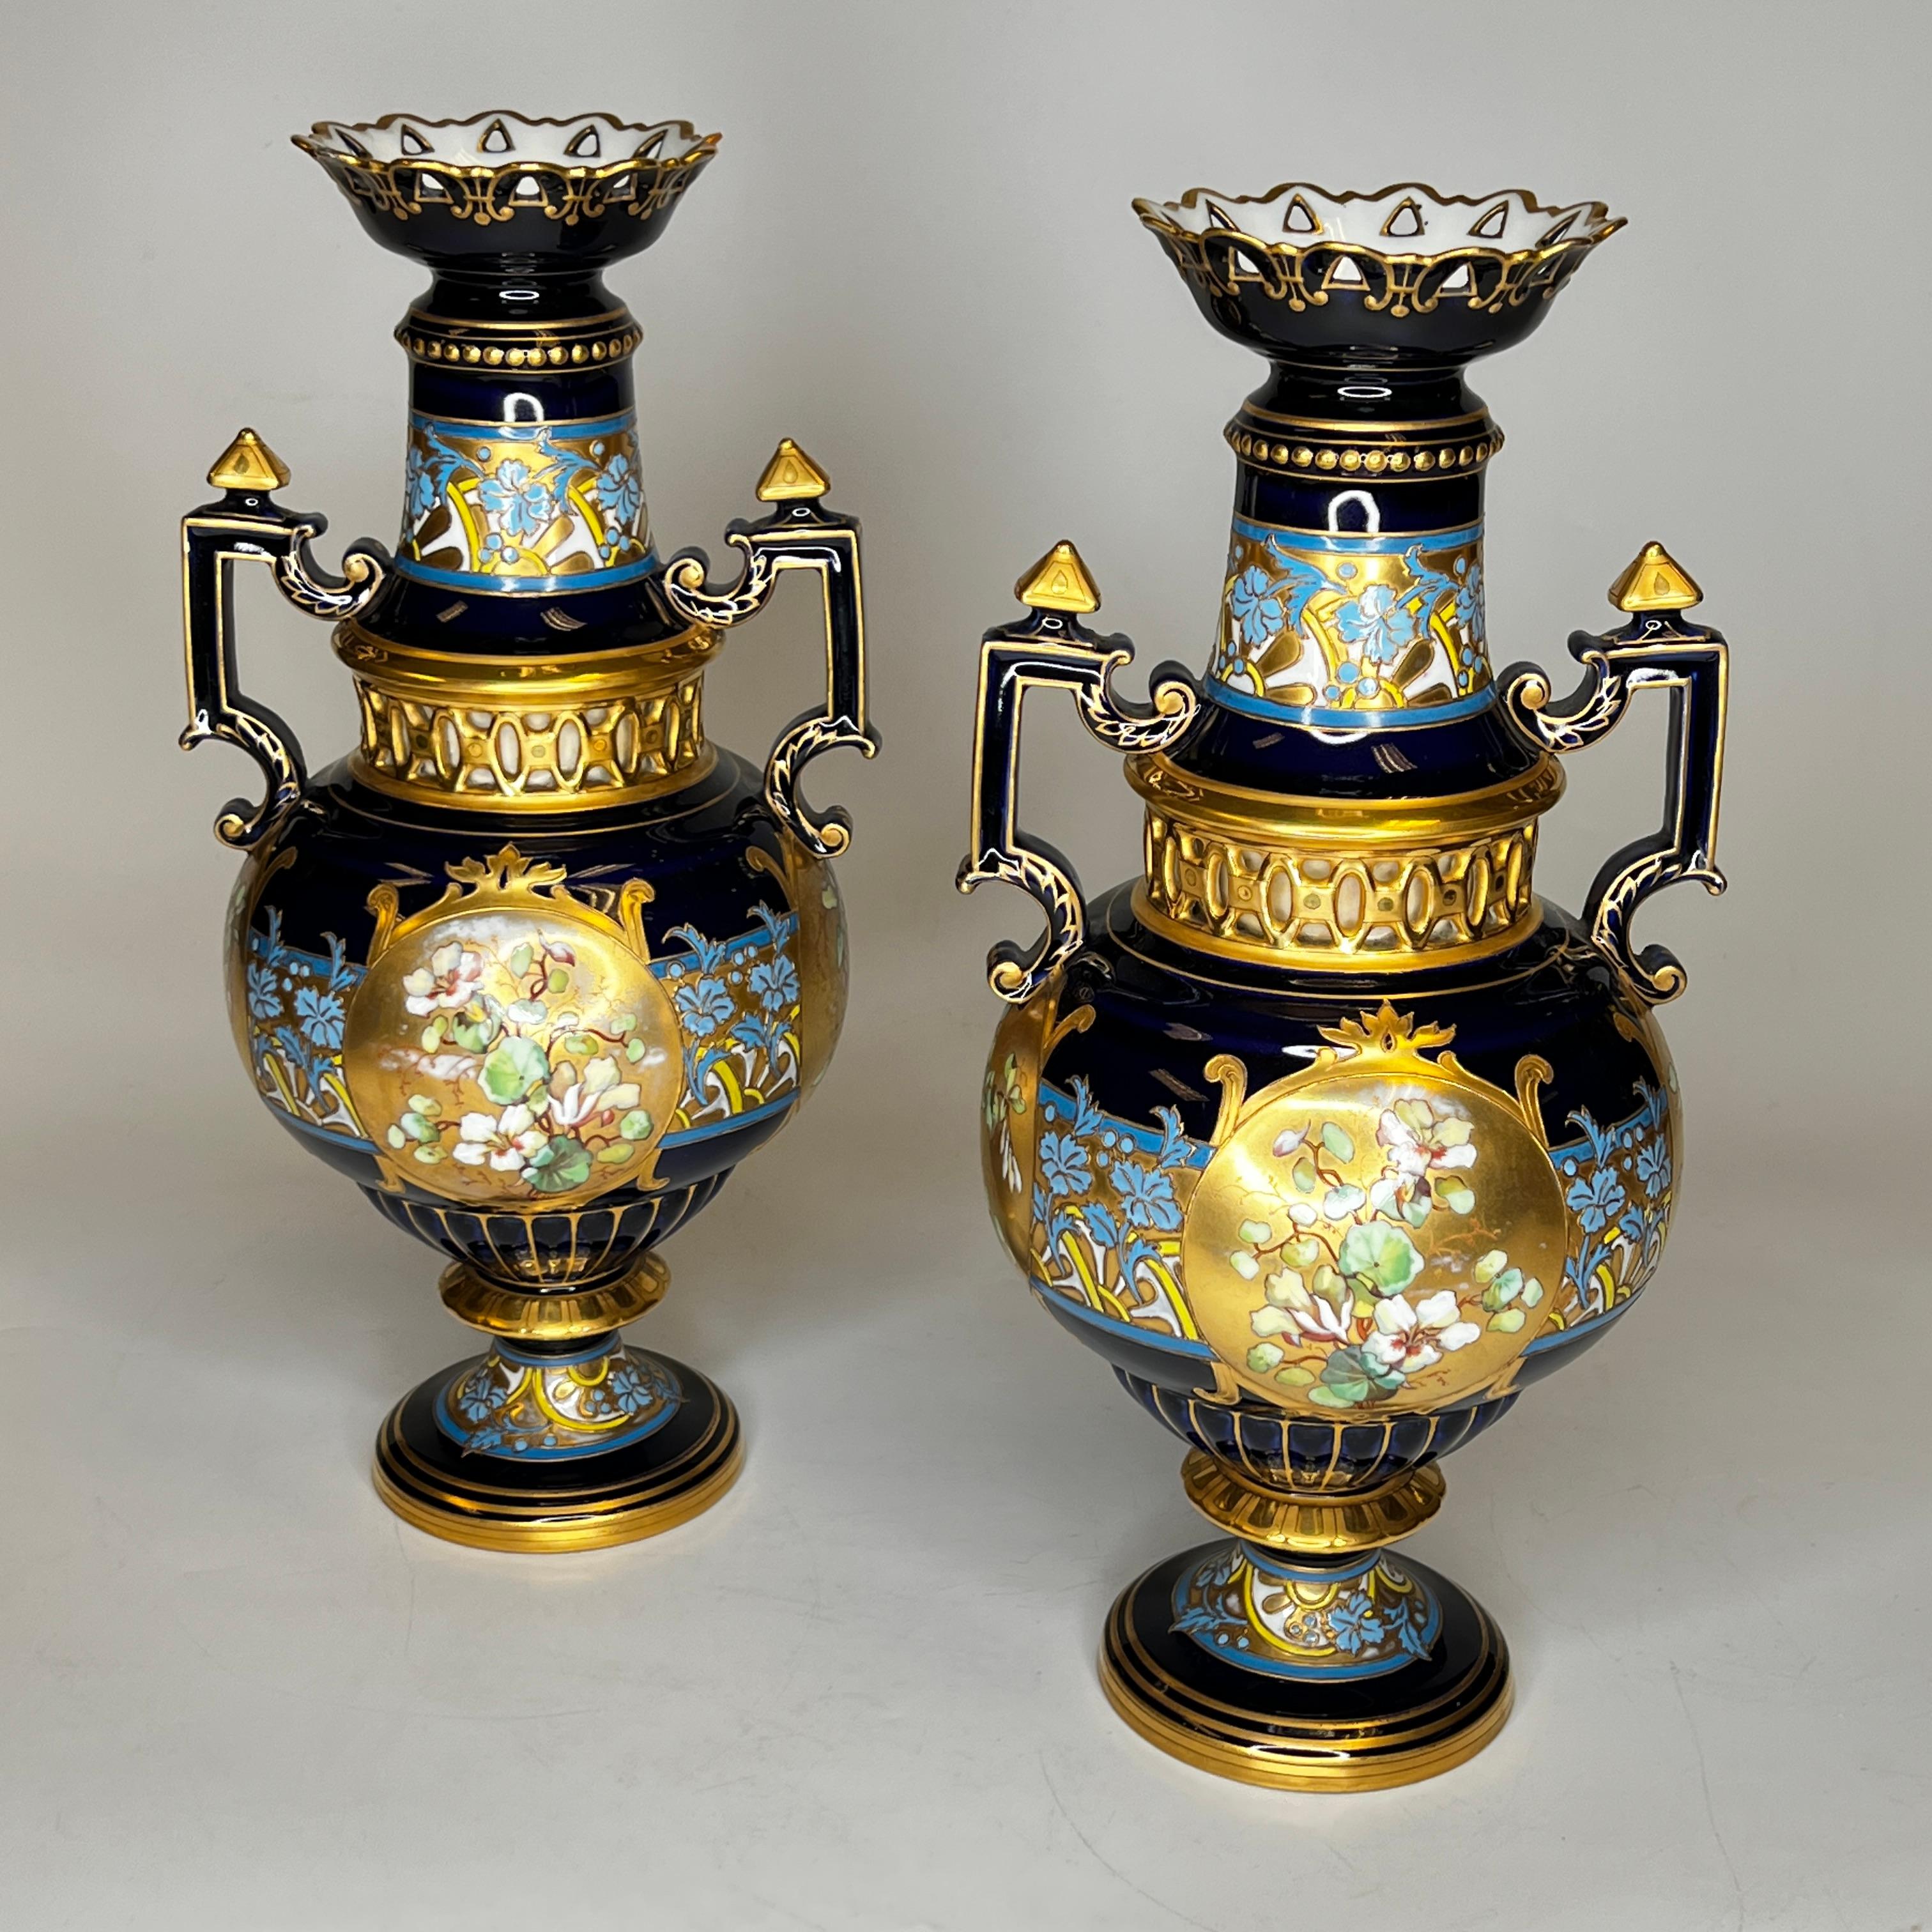 Pair Antique Czech Floral Painted and Gilded Porcelain Vases by Fischer and Meig, circa 1880s.